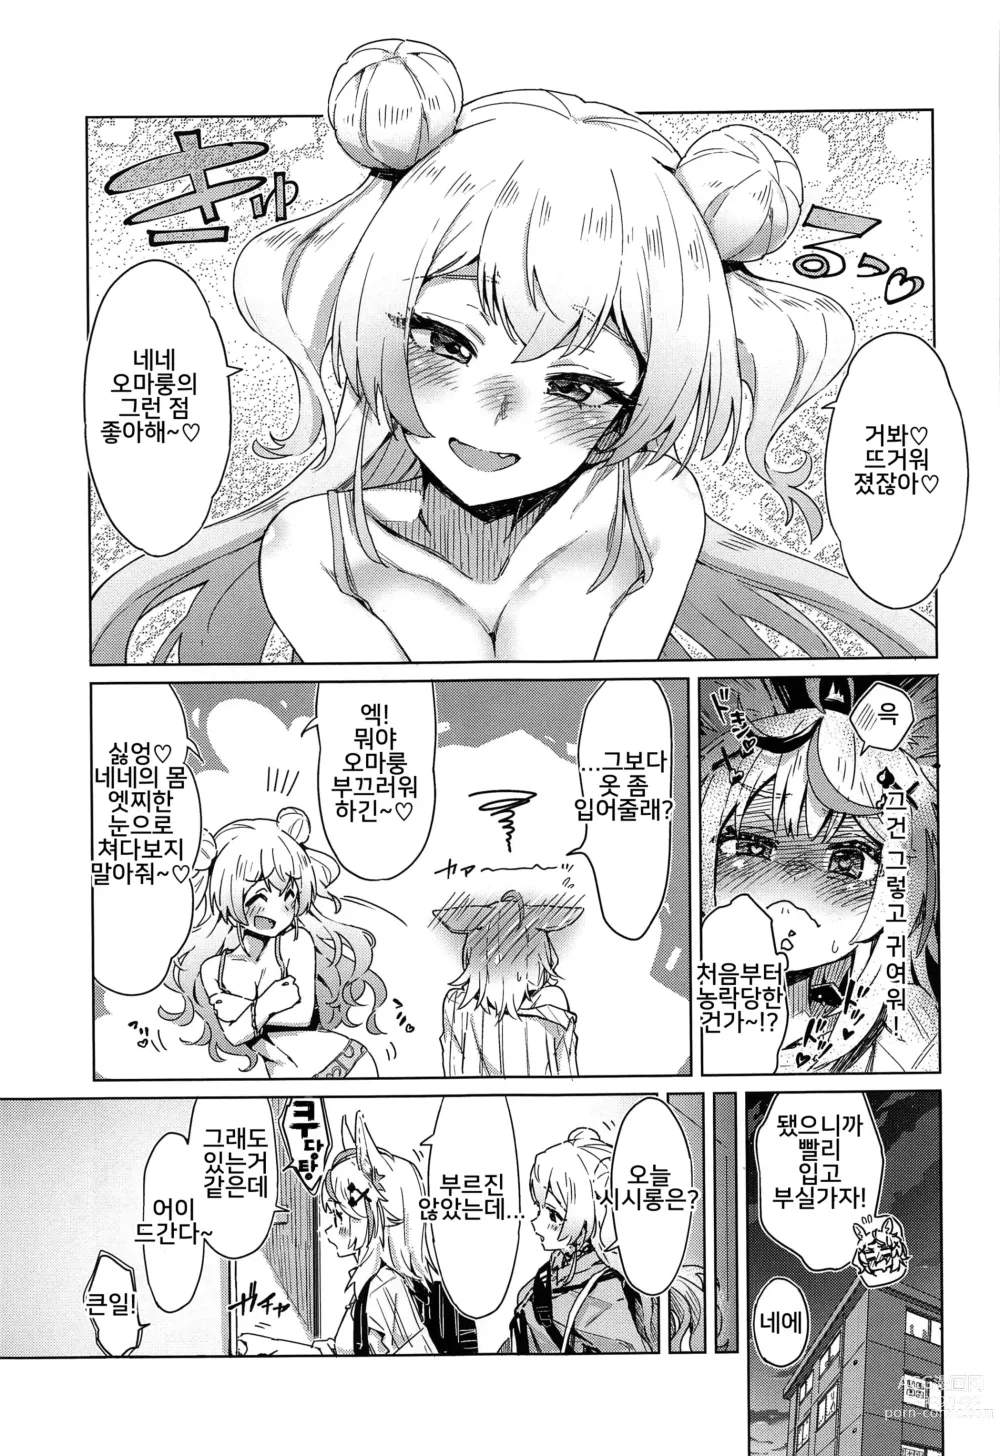 Page 8 of doujinshi Fennec wa Iseijin no Yume o Miru ka - Does The Fennec Dream of The Lovely Visitor?